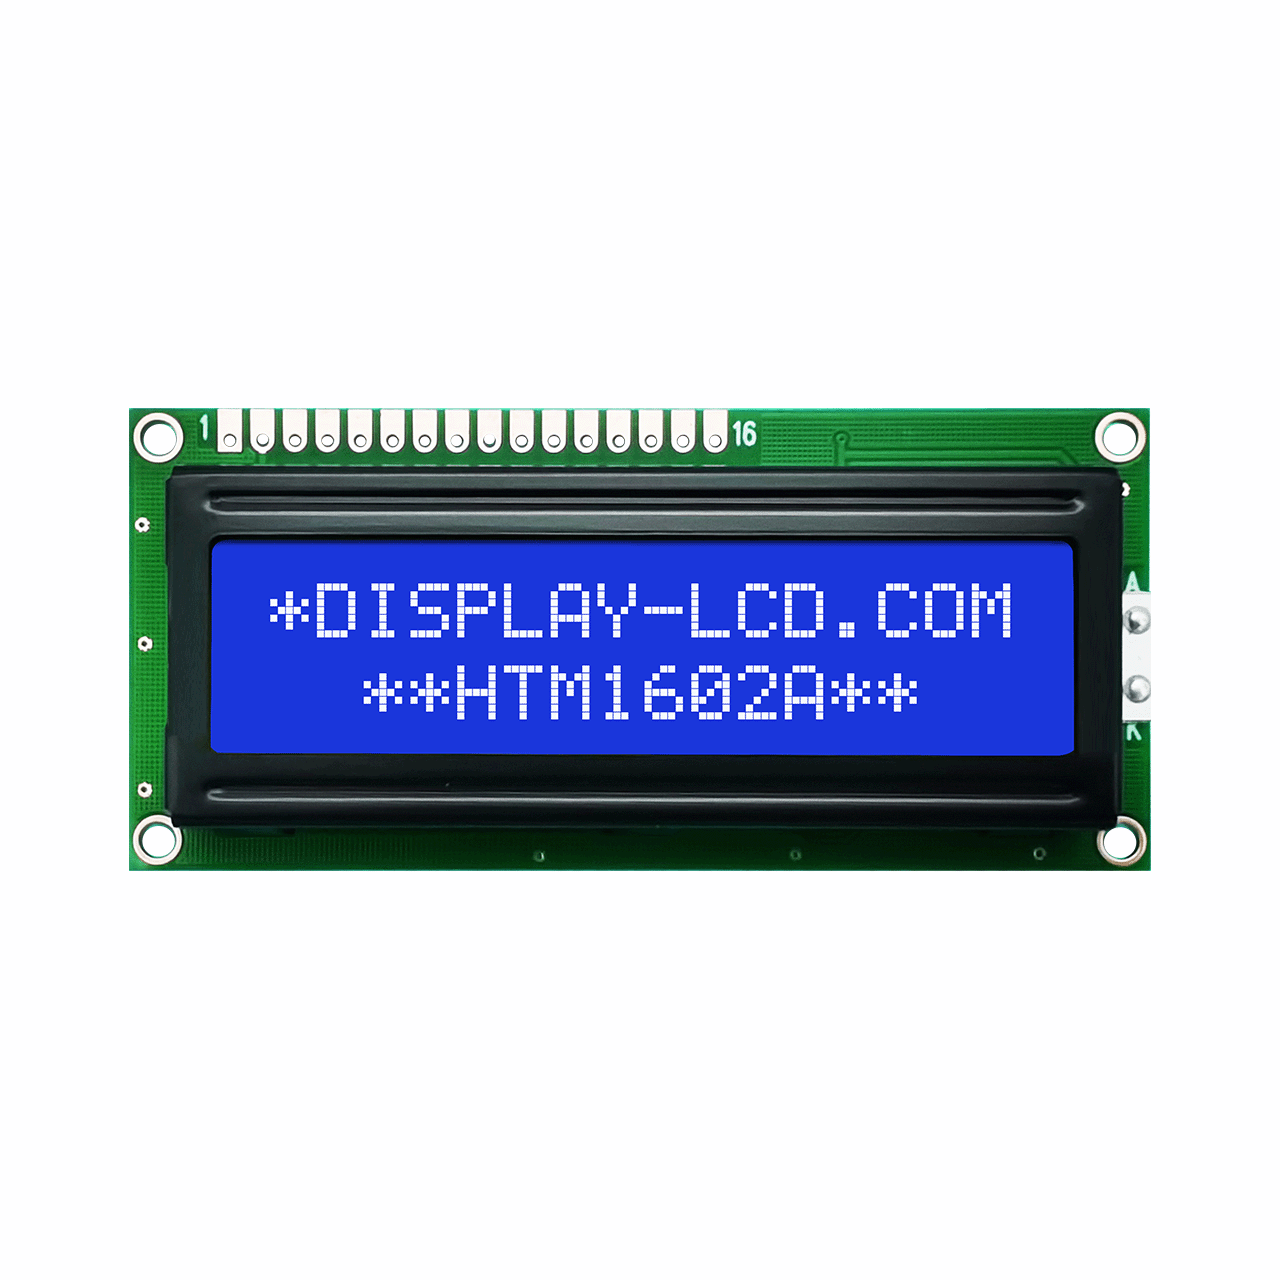 2X16 Character STN- Blue LCD Module Display with White Side Backlight 5.0V-Arduino